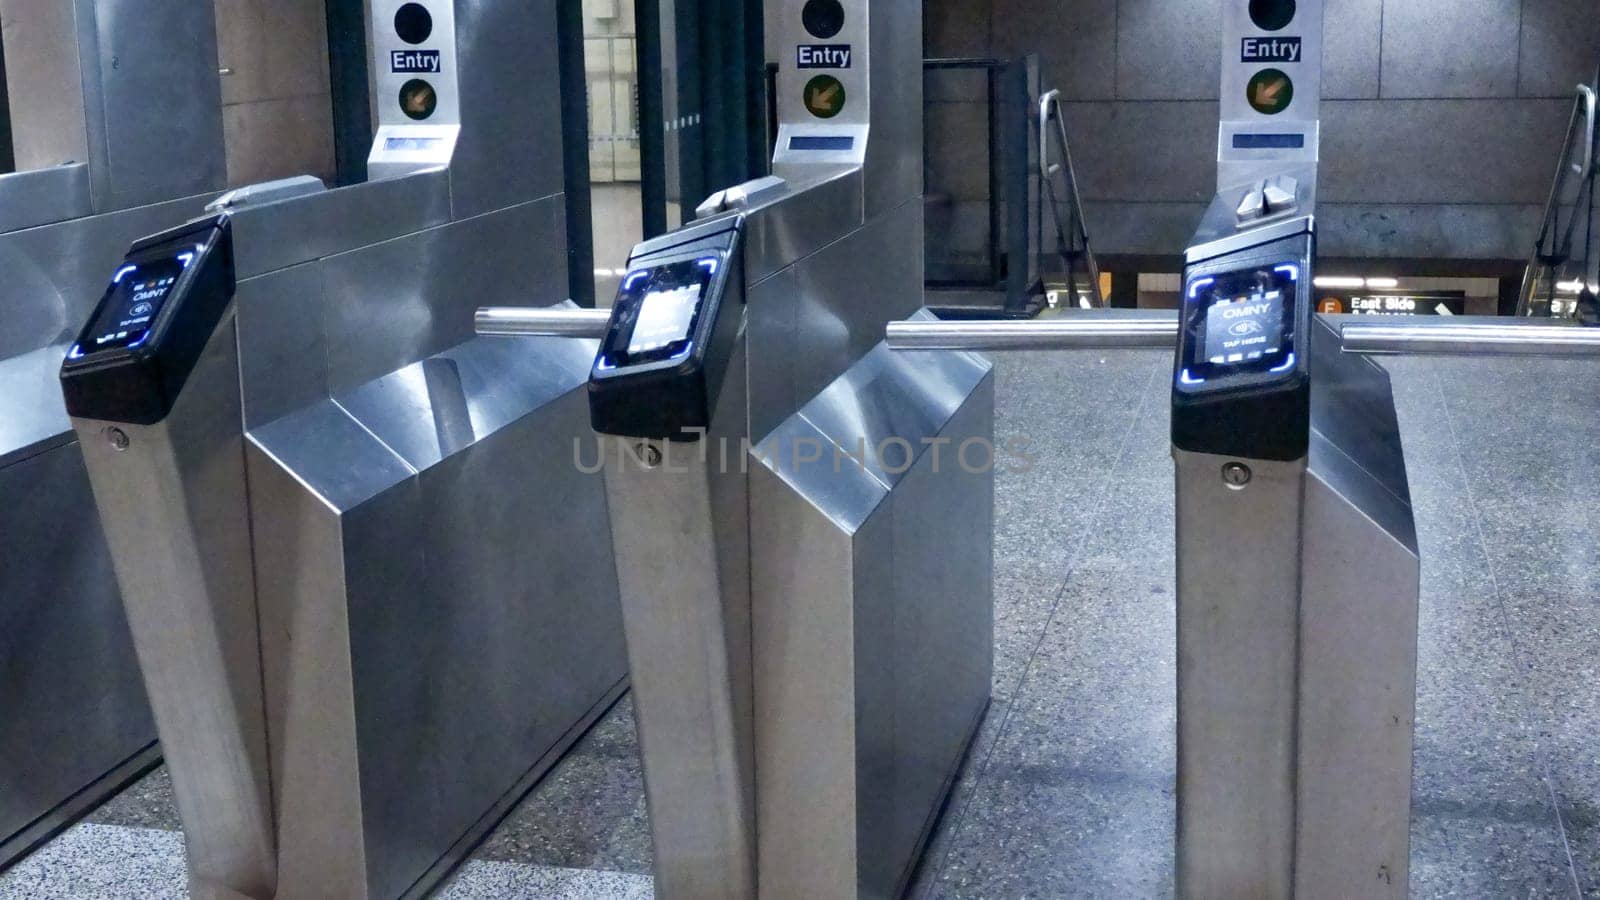 OMNY MTA Contactless fare payment system at grand central terminal. New York Subway station. NY, USA - July 15, 2023. by JuliaDorian